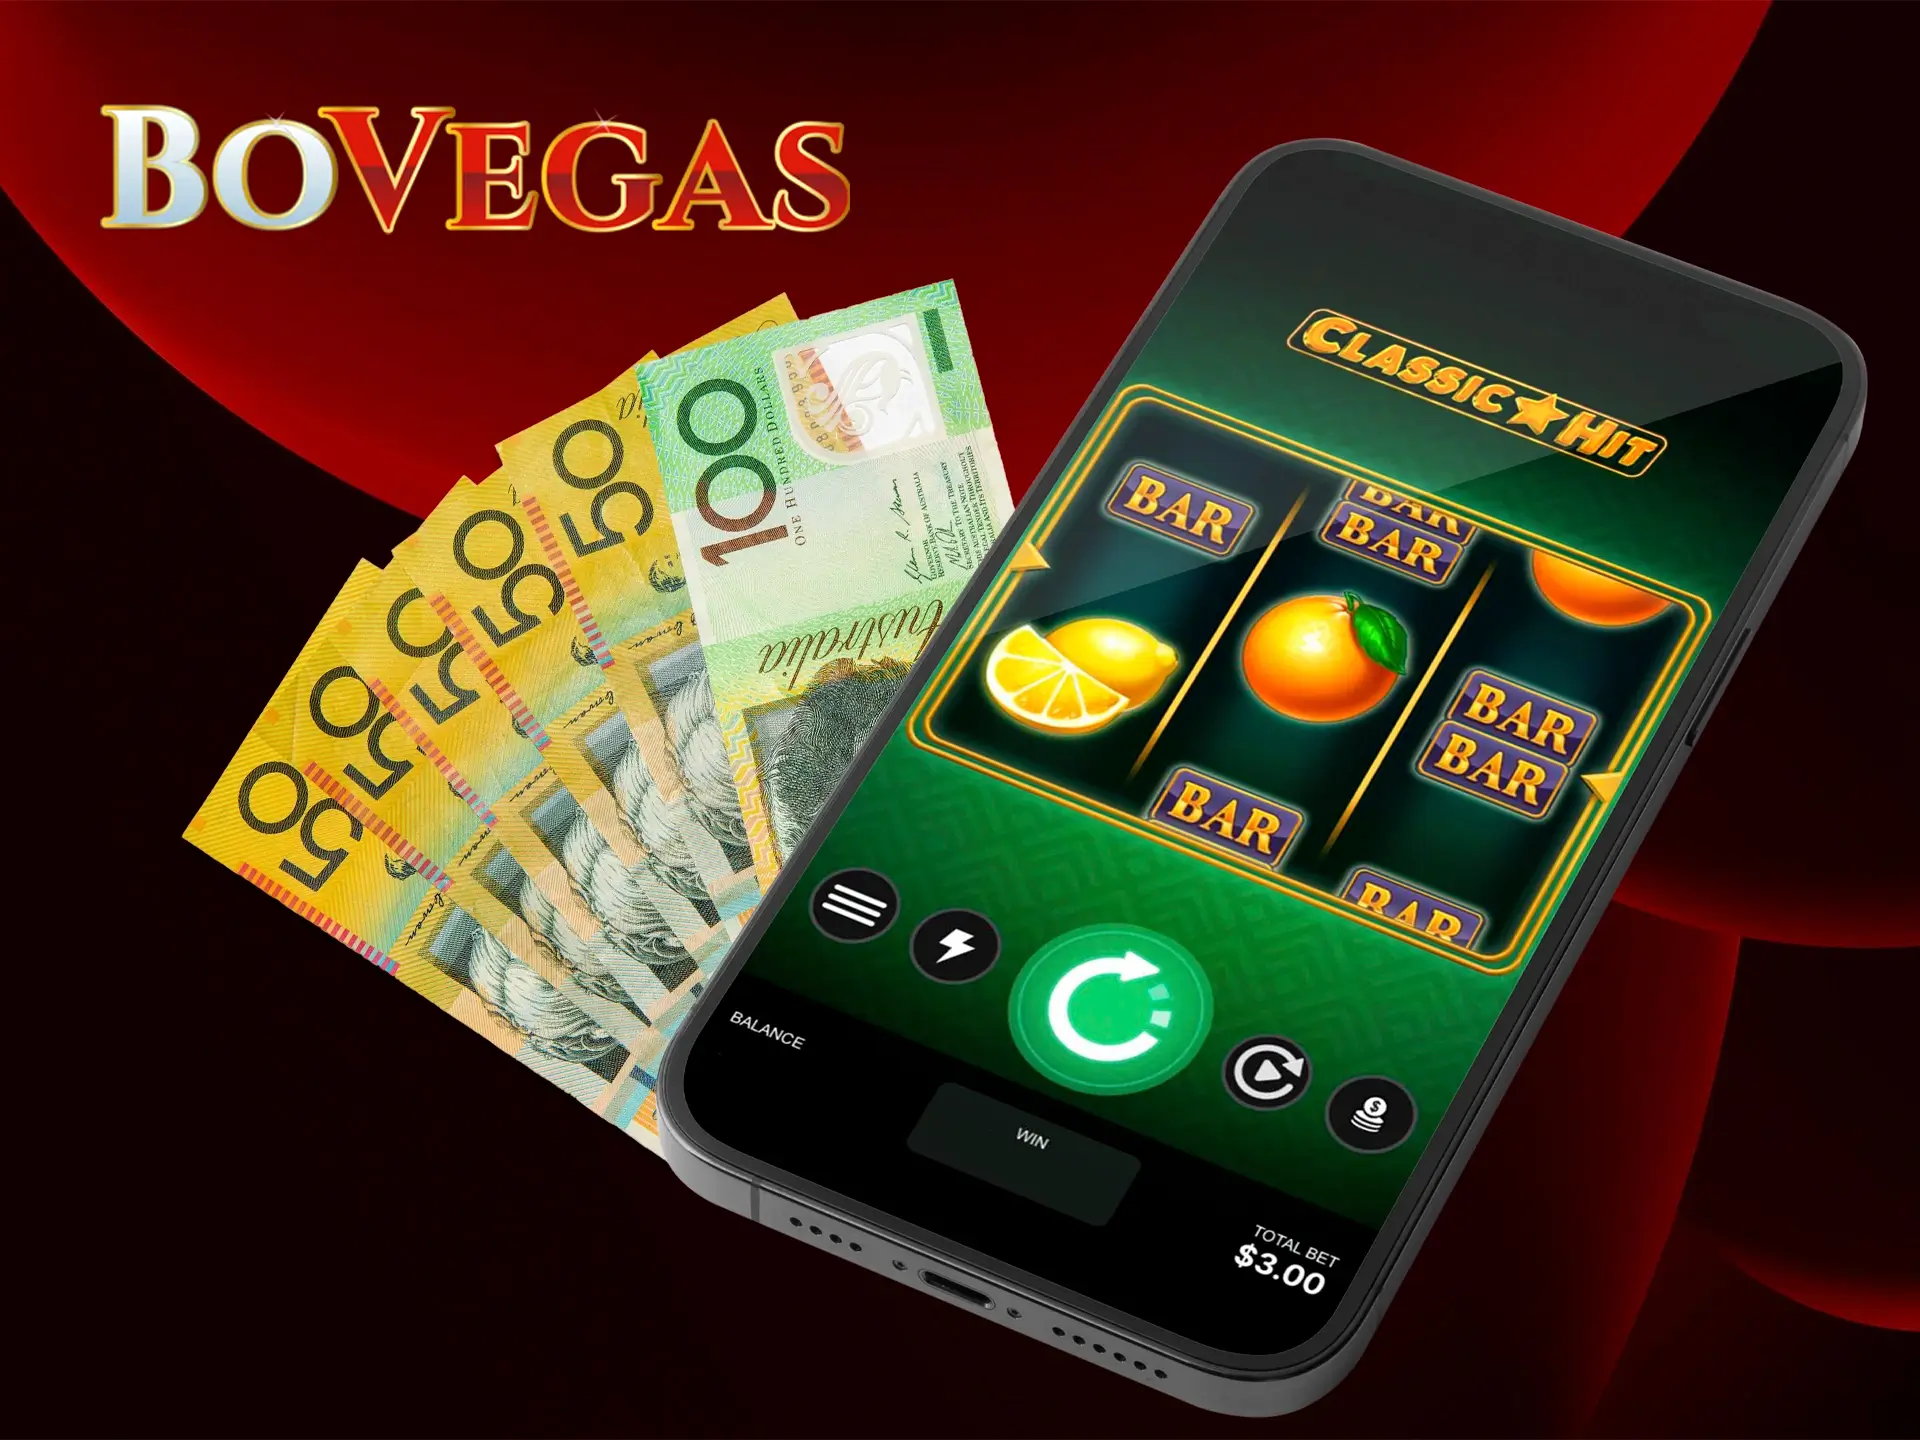 The app from BoVegas gives you high performance and smoothness when playing casino slots games.